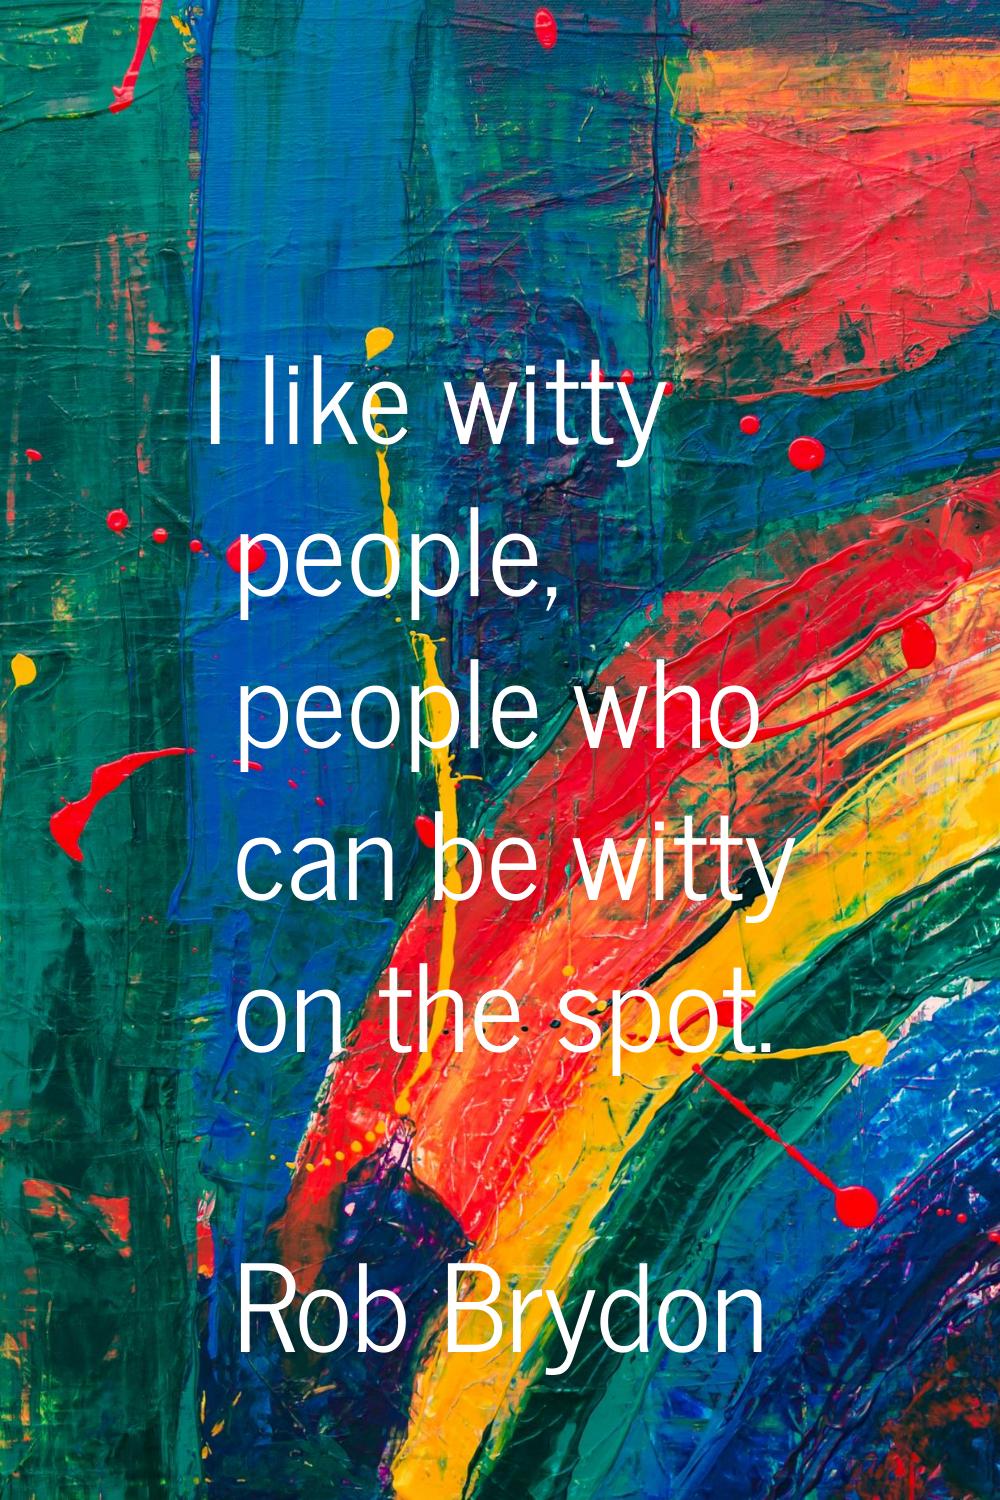 I like witty people, people who can be witty on the spot.